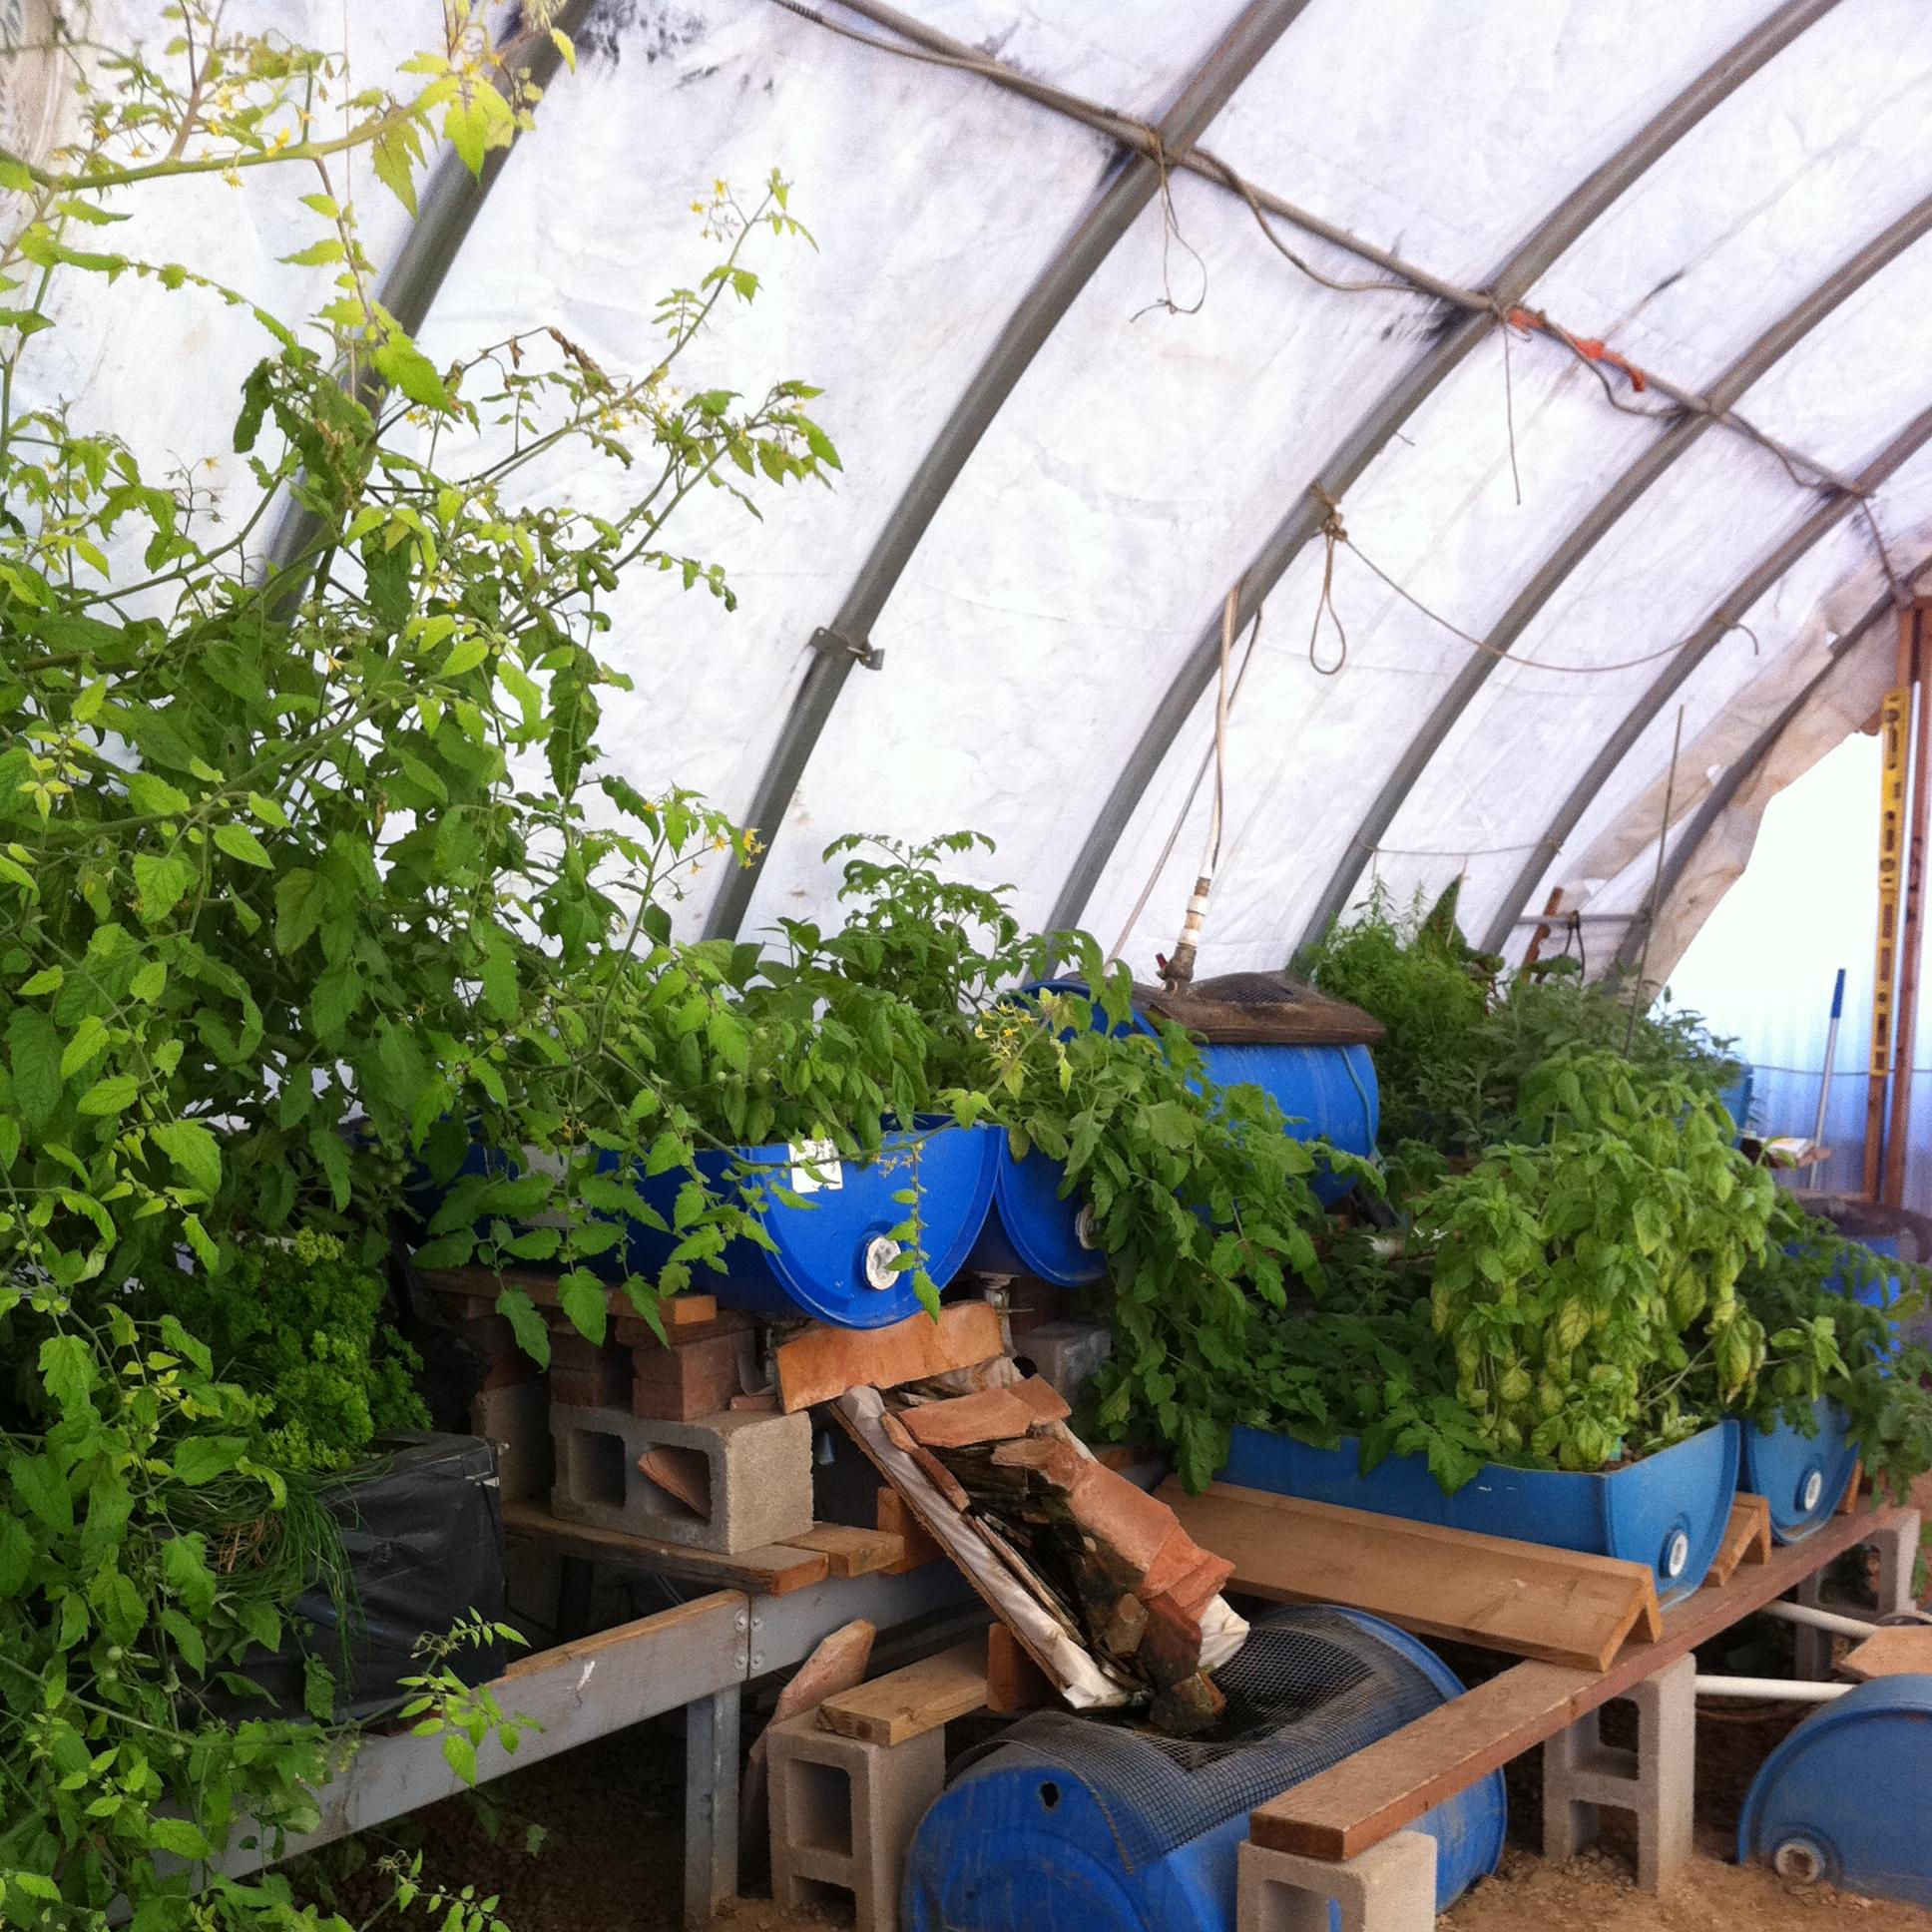 Can Aquaponics be Financially Viable? Seven Years after we First Asked – Do We Know Now?